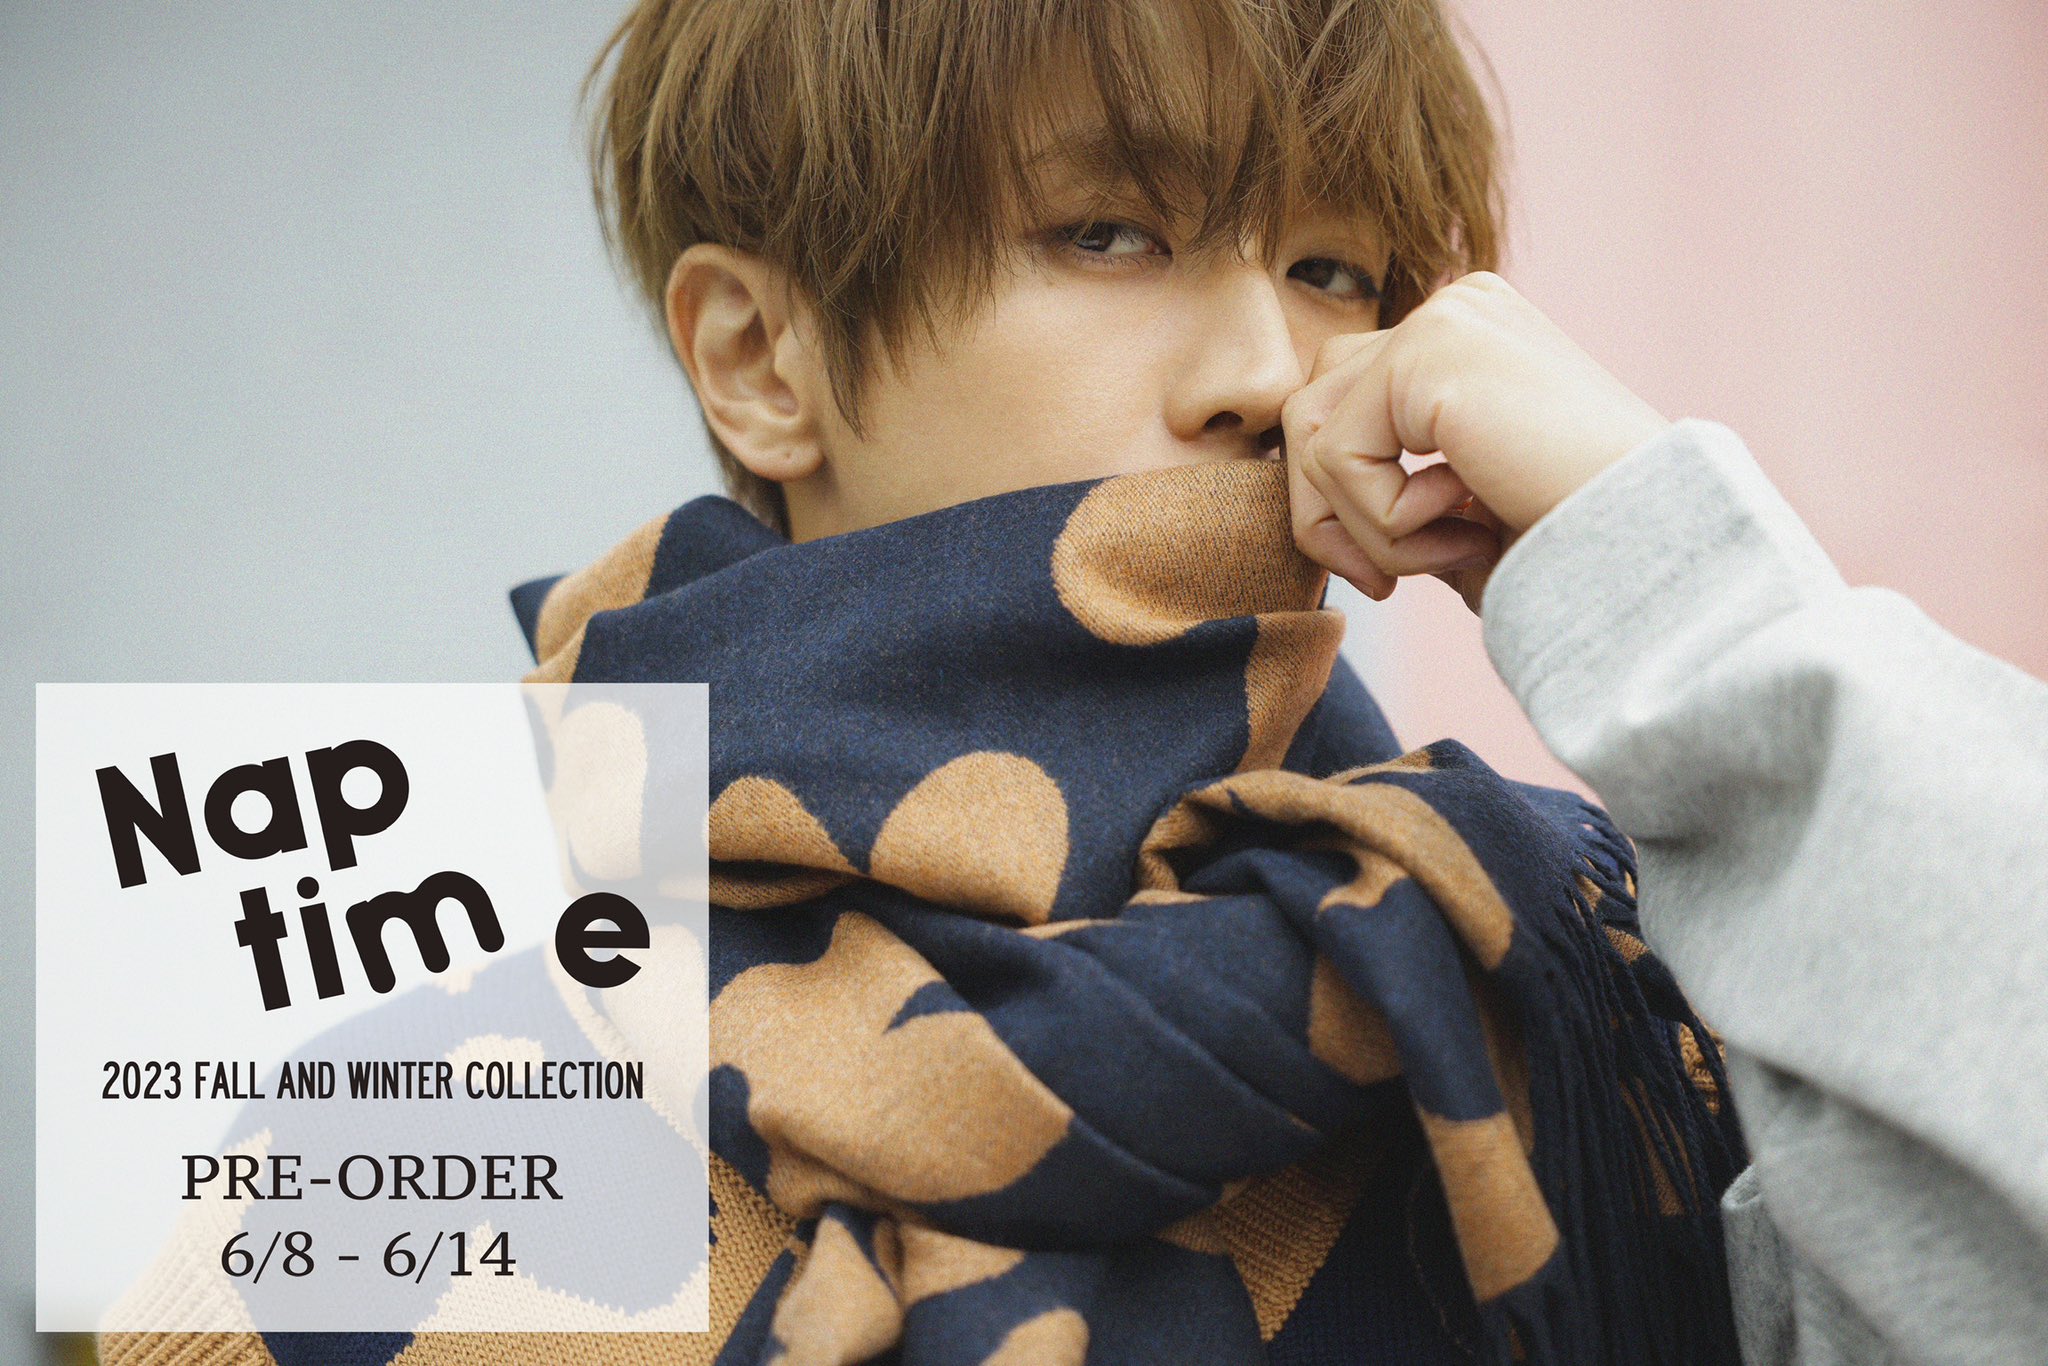 Nissy staff on X: "Naptime. 《 FALL/WINTER COLLECTION》受注